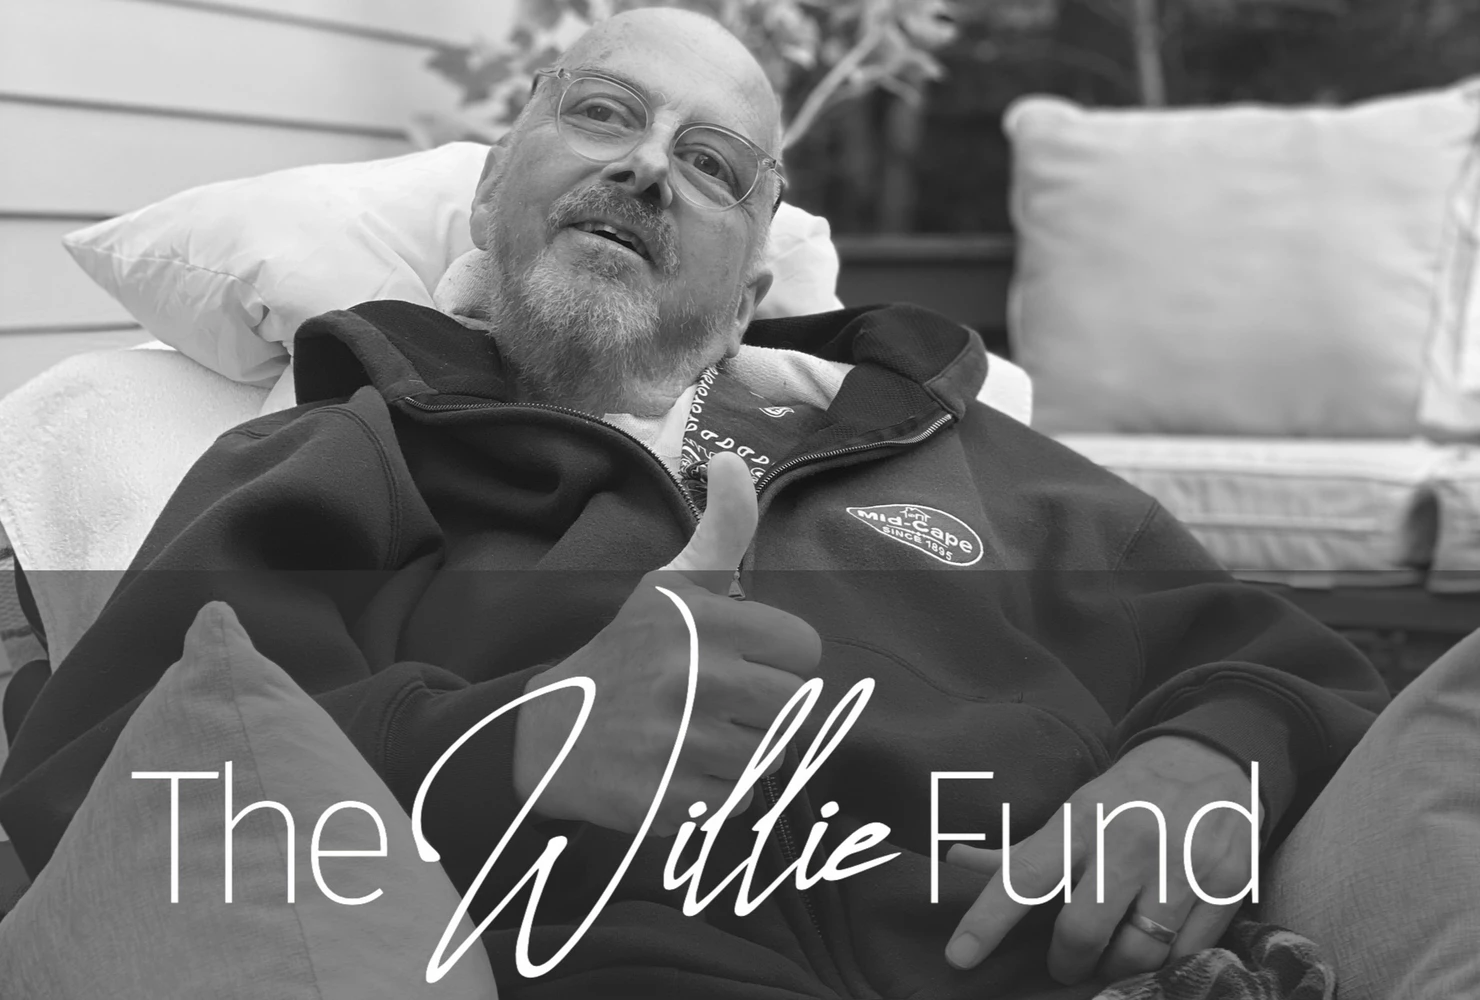 EZ-ERC Donates $10k to The Willie Fund, in hopes to help find a cure for Head and Neck Cancer.